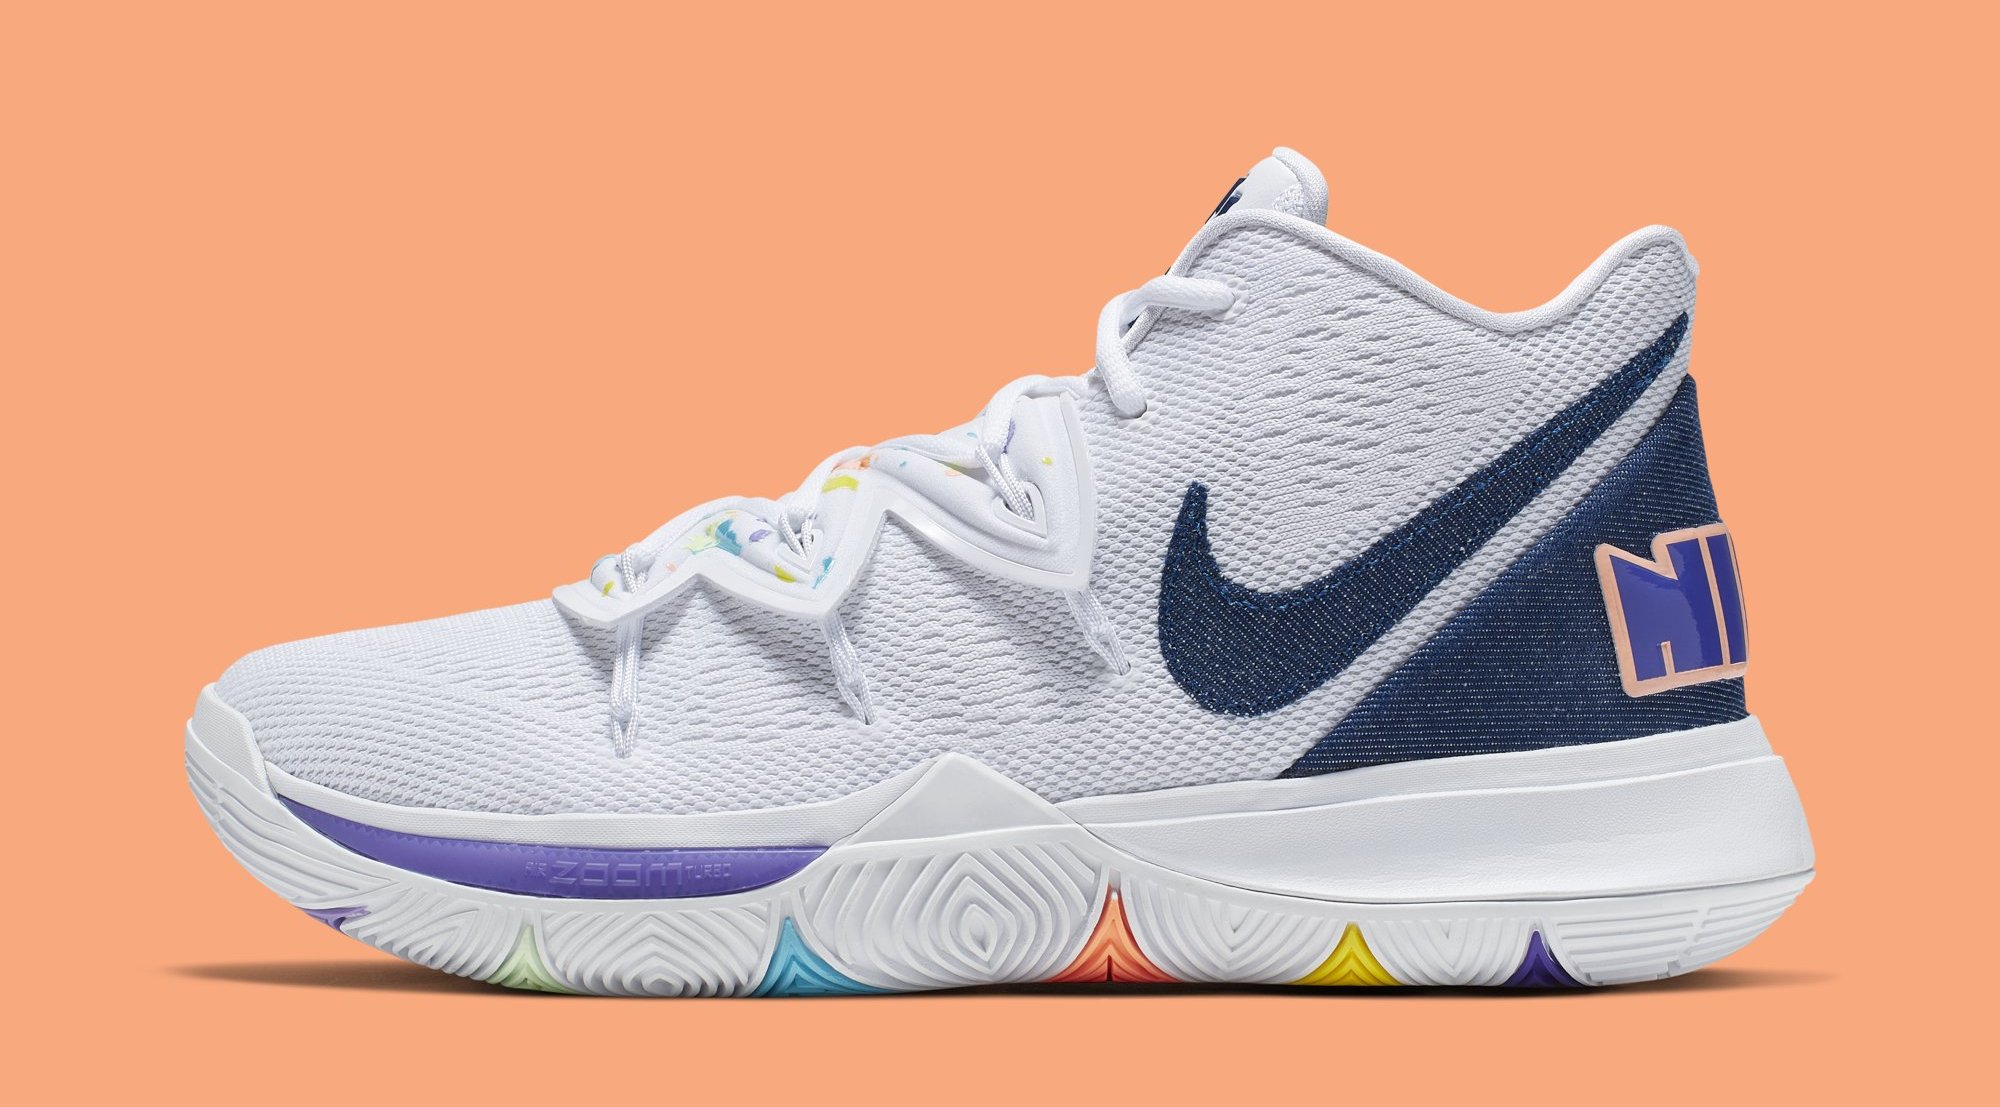 Nike Kyrie 5 &#x27;Have a Nike Day&#x27; AO2919 101 (Lateral)